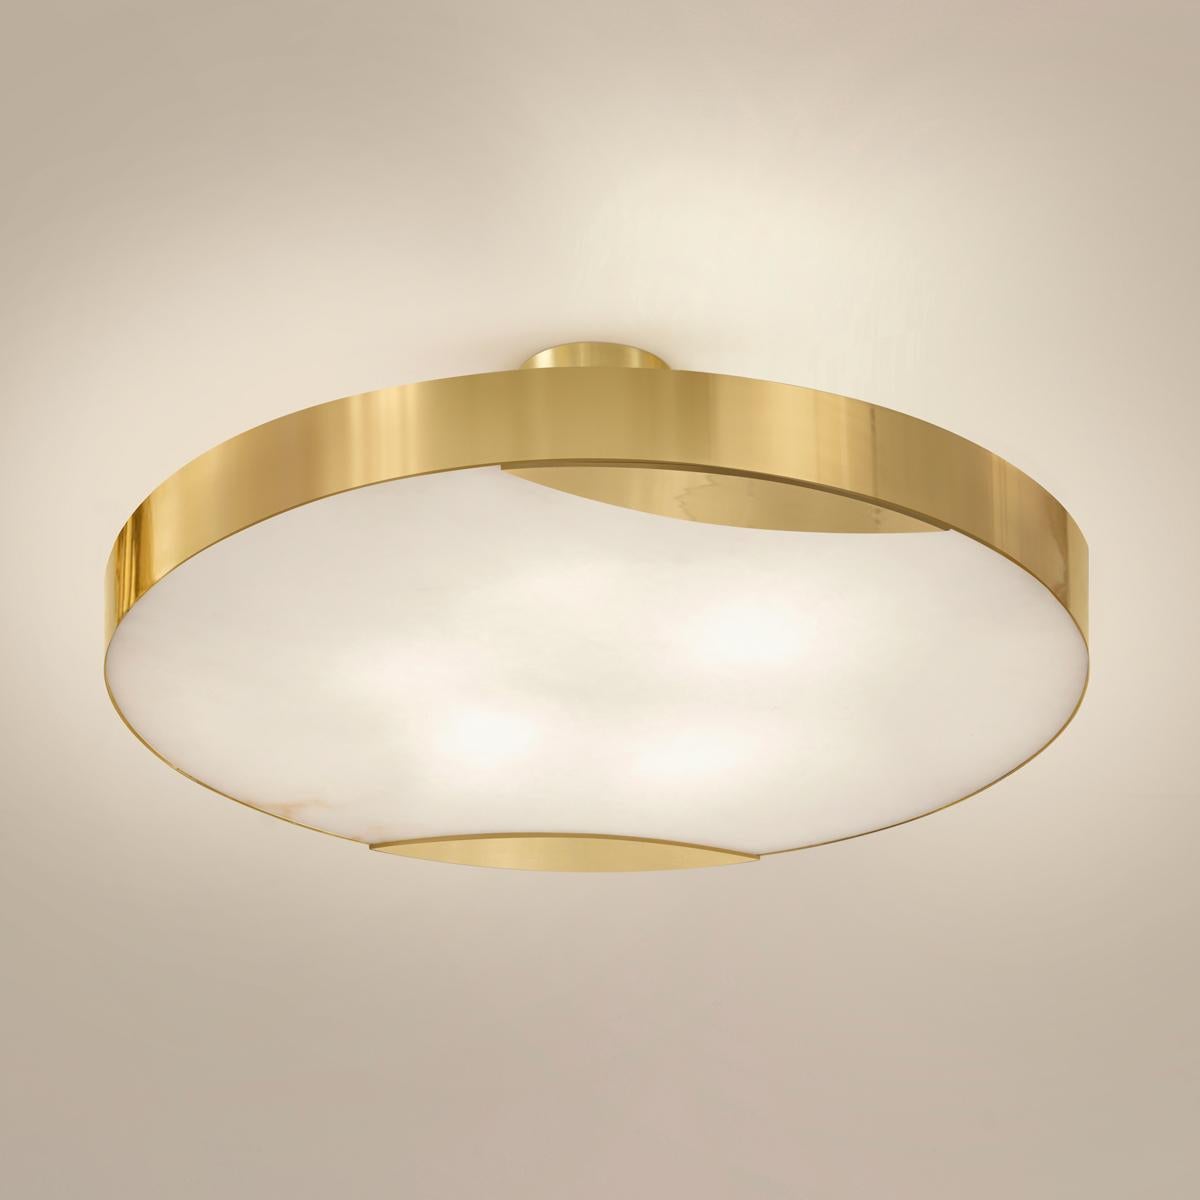 The Cloud N.1 ceiling light embodies a minimalist design with a clean brass band and a glowing Tuscan alabaster diffuser. Available in 4 sizes and can be installed as a semi flush mount or pendant.

Shown in the primary images in polished